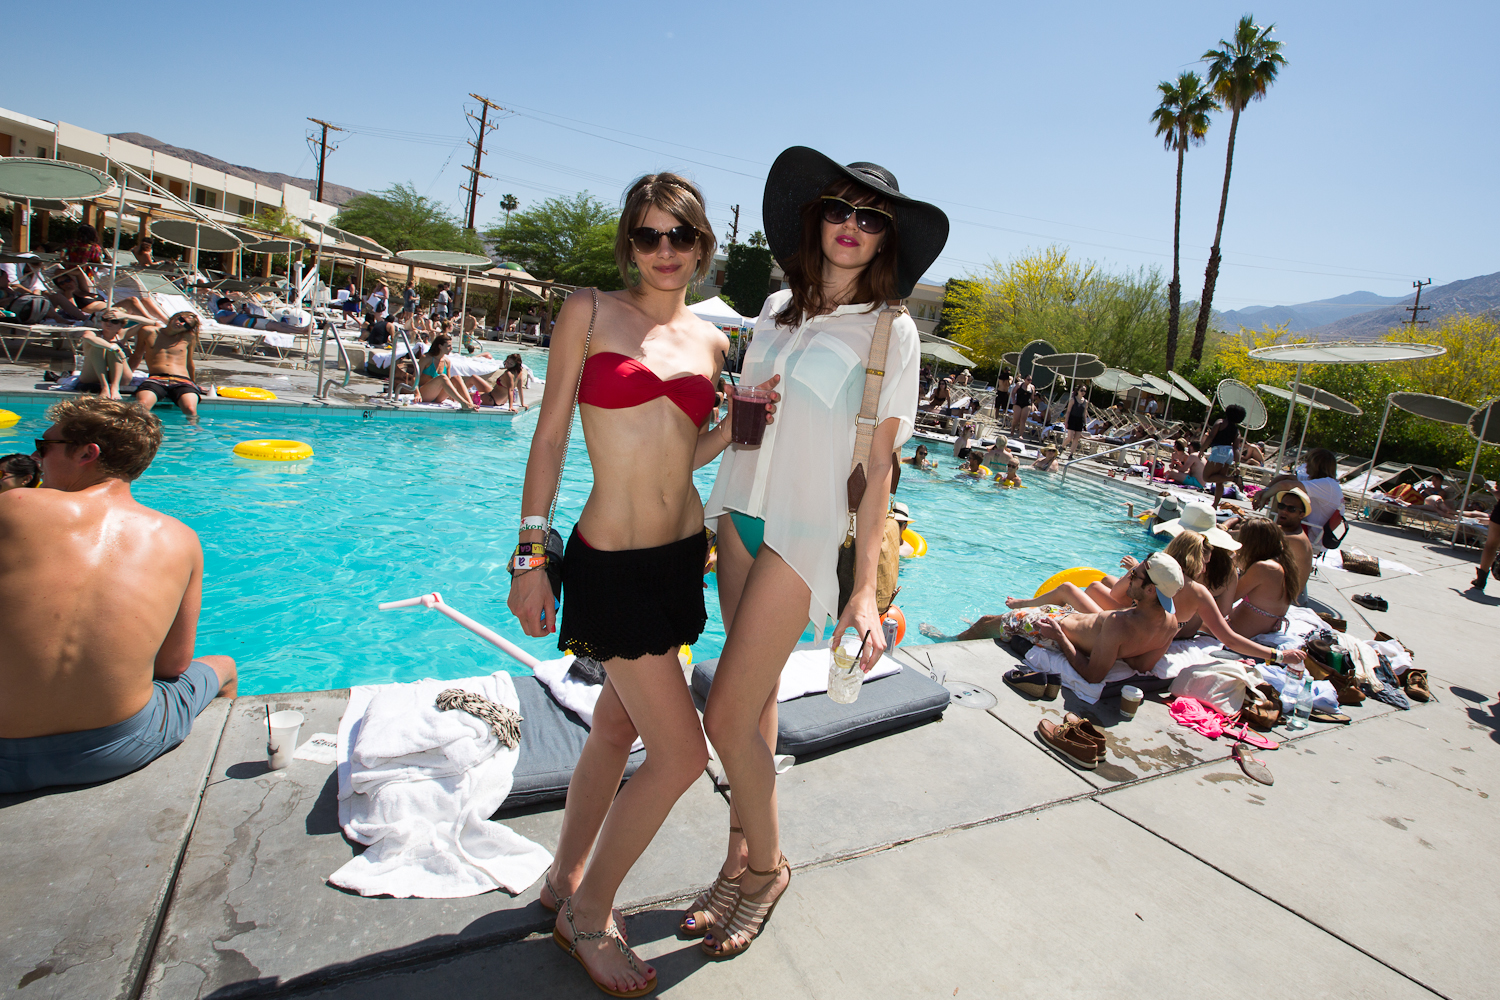 Flashback The Do Over At Ace Hotel Swim Club In Palm Springs On April 21 13 Nickydigital Com Smile